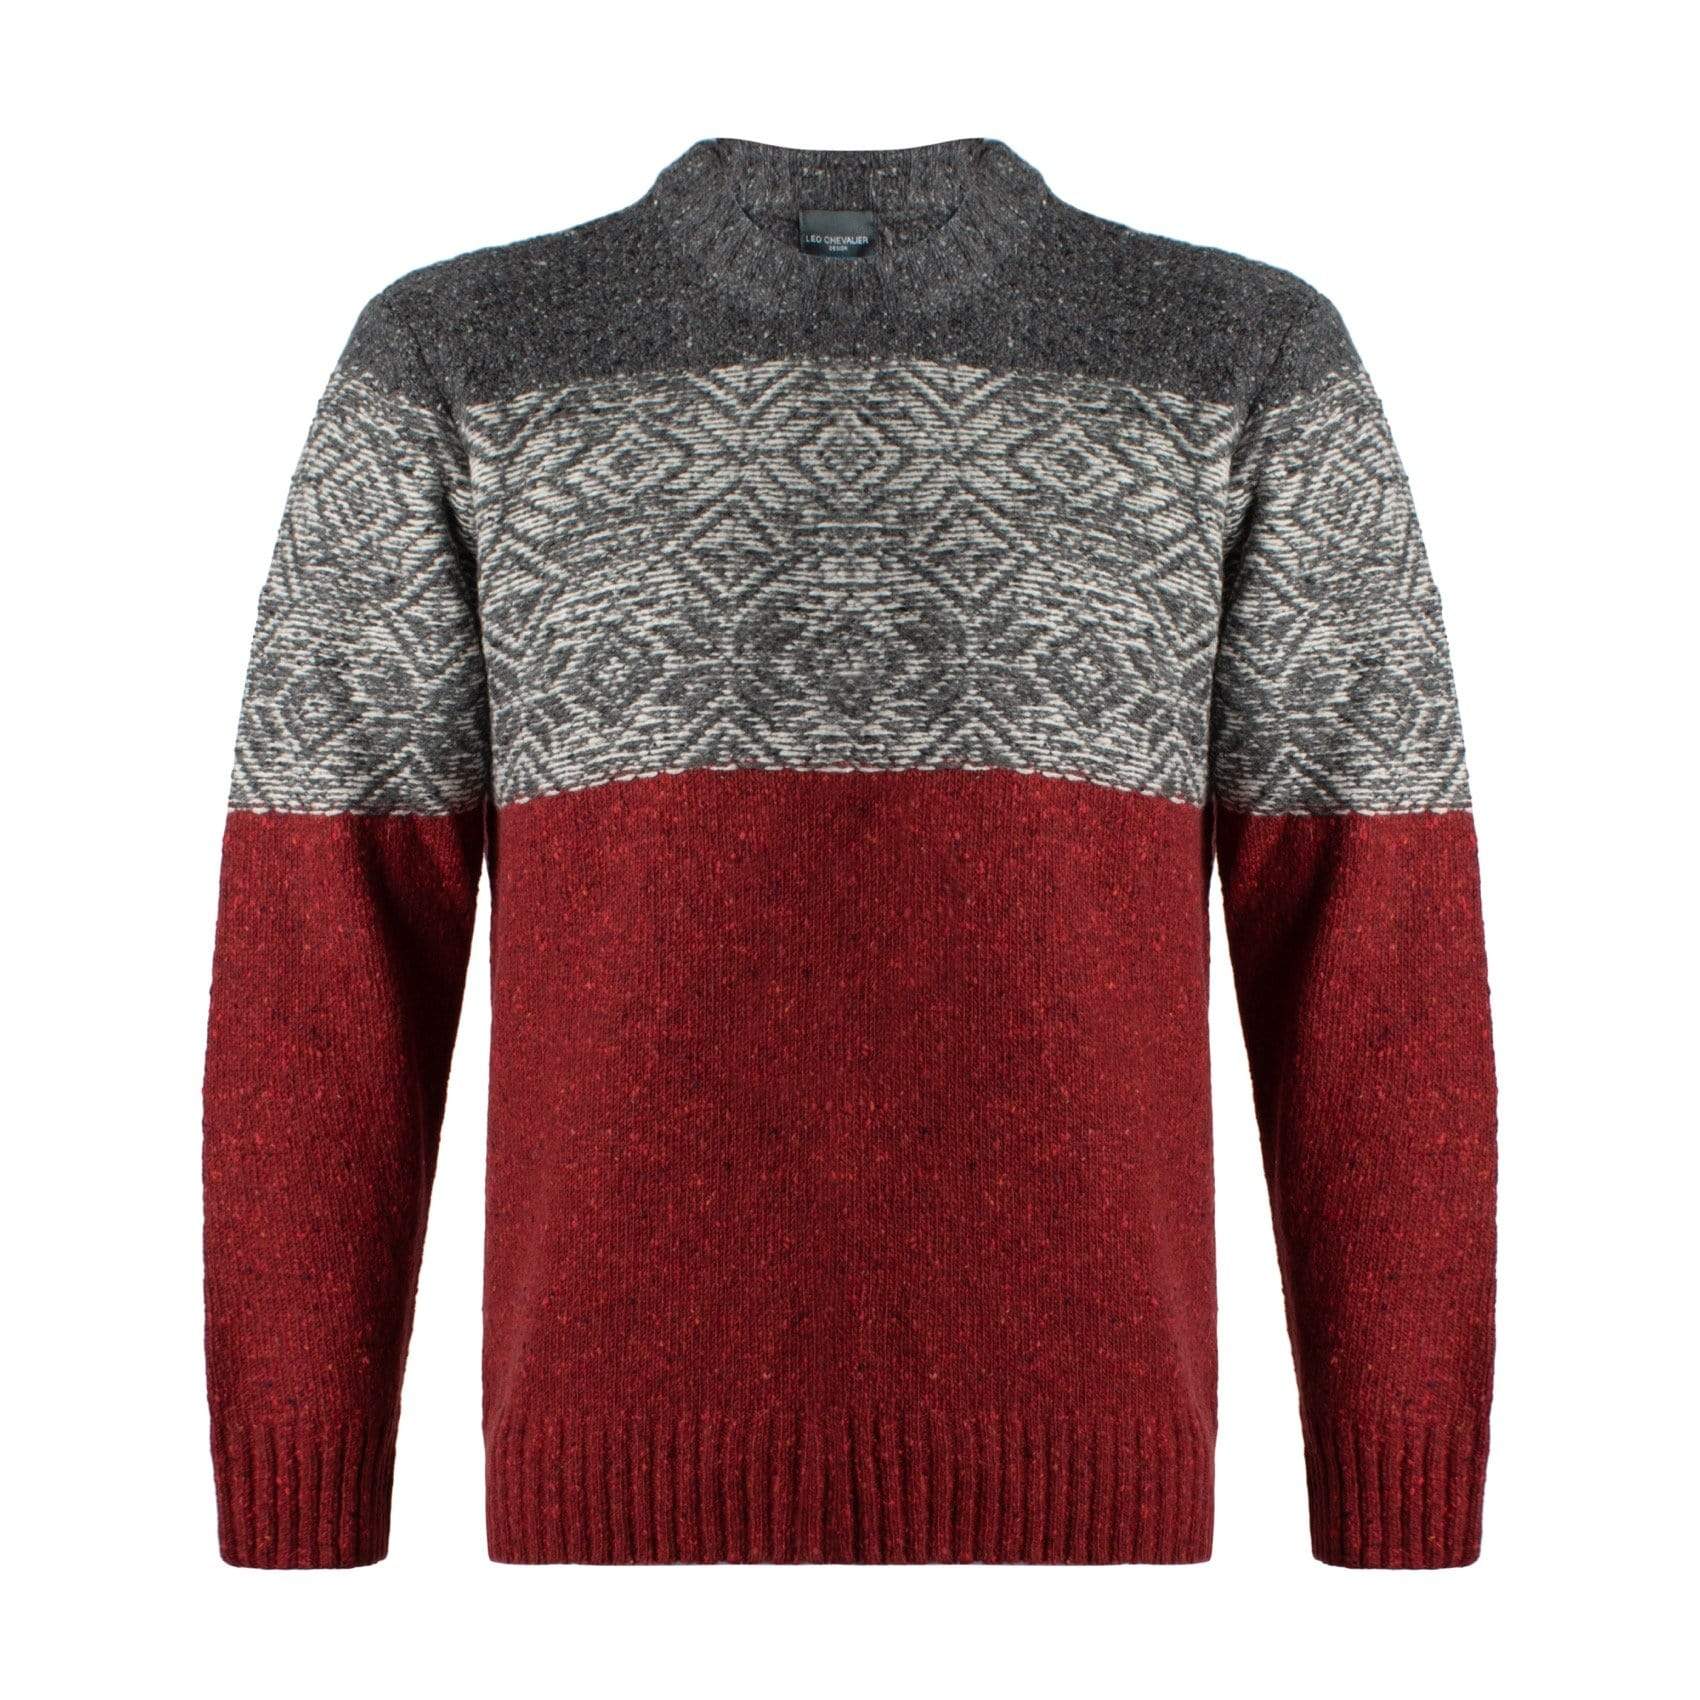 Leo Chevalier Design Red and tonal Grey Fair Isle Crewneck Sweater Made In Italy